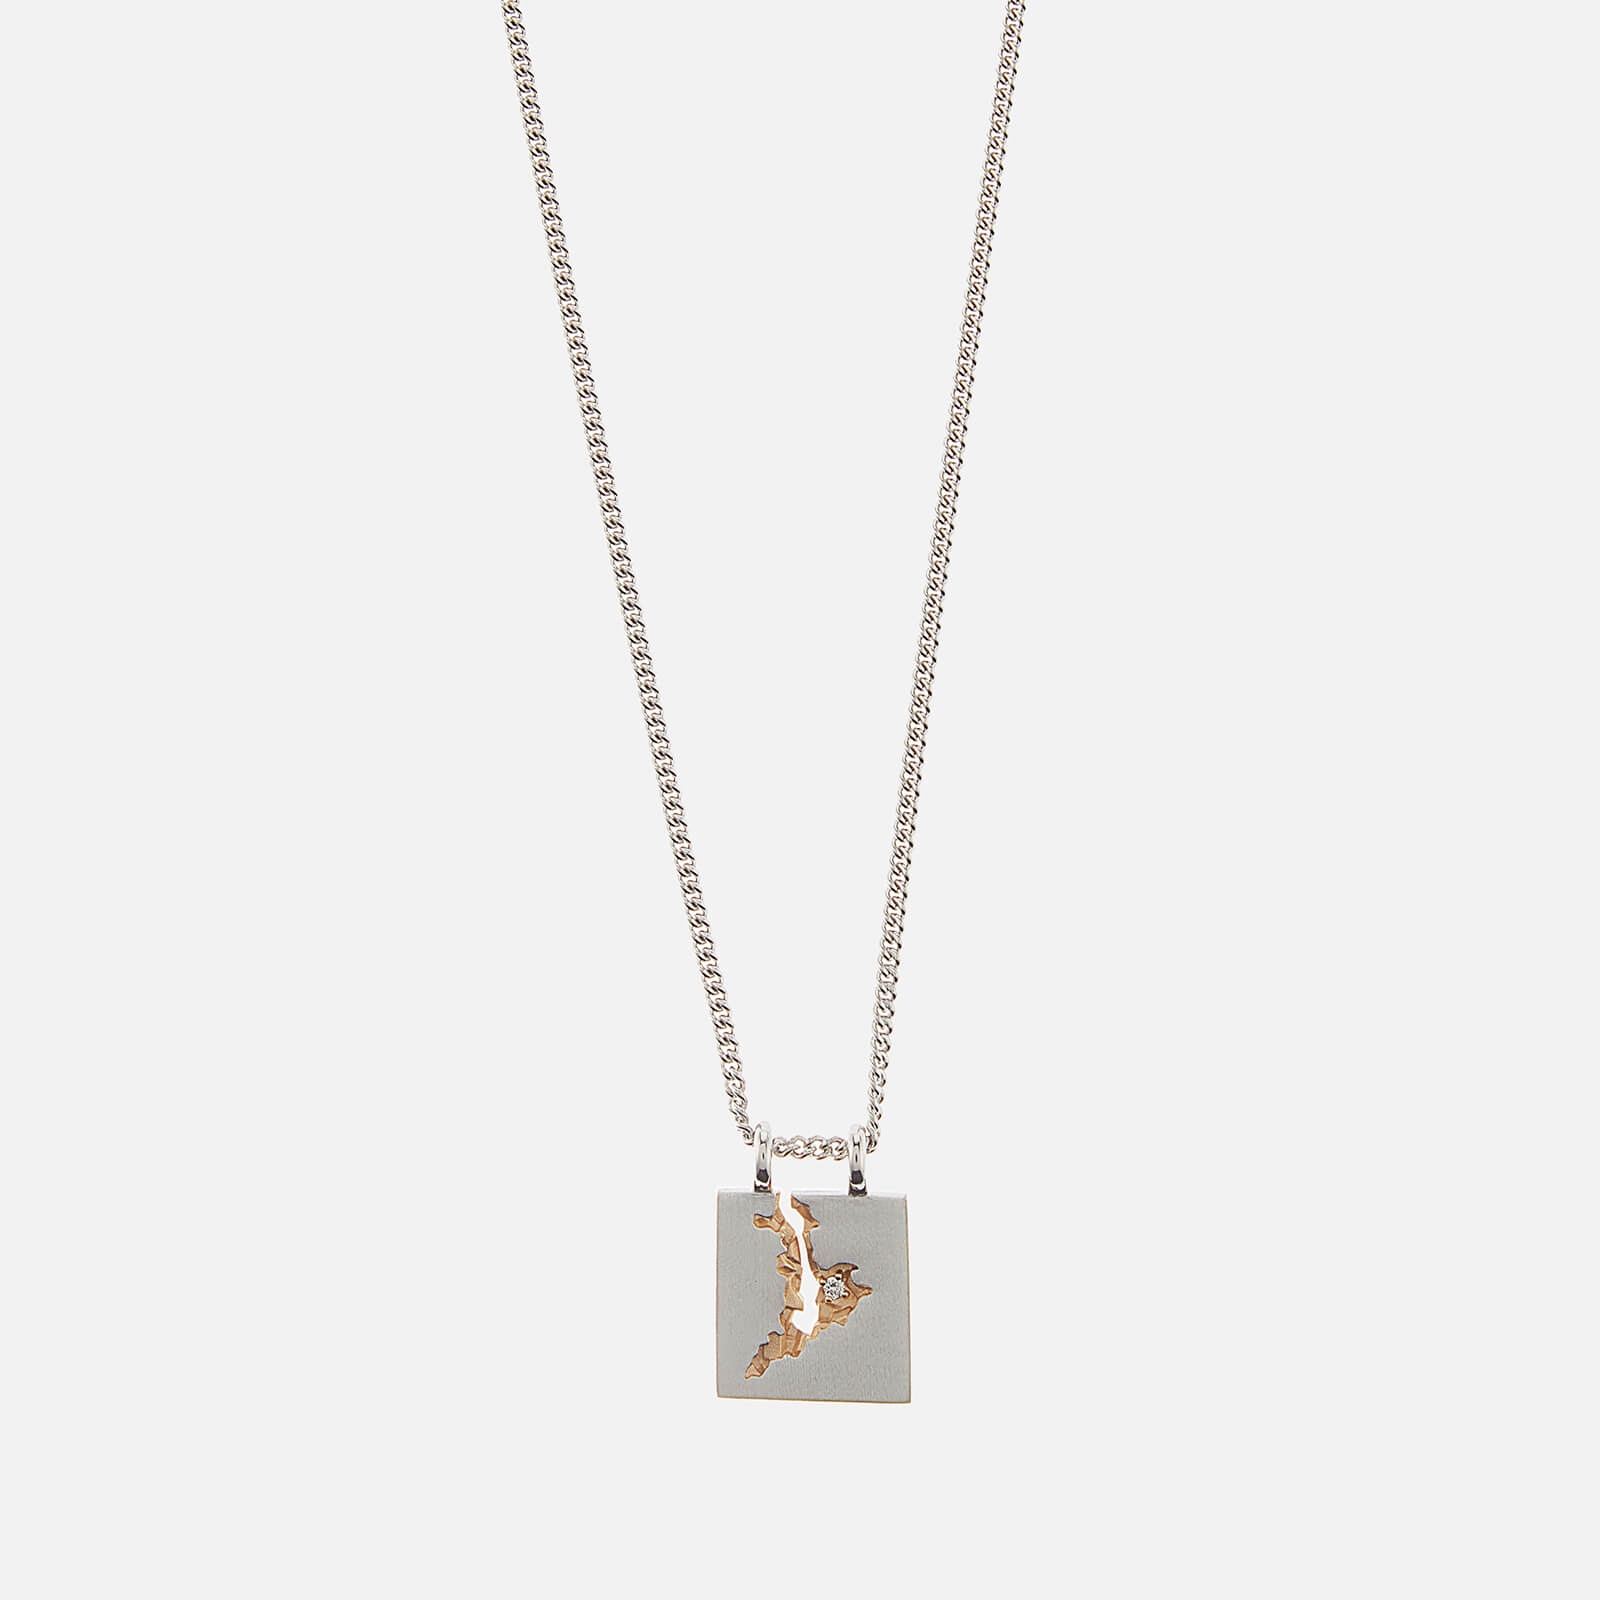 Tom Wood Men's Mined Pendant - Silver/Gold - 24.5 Inches